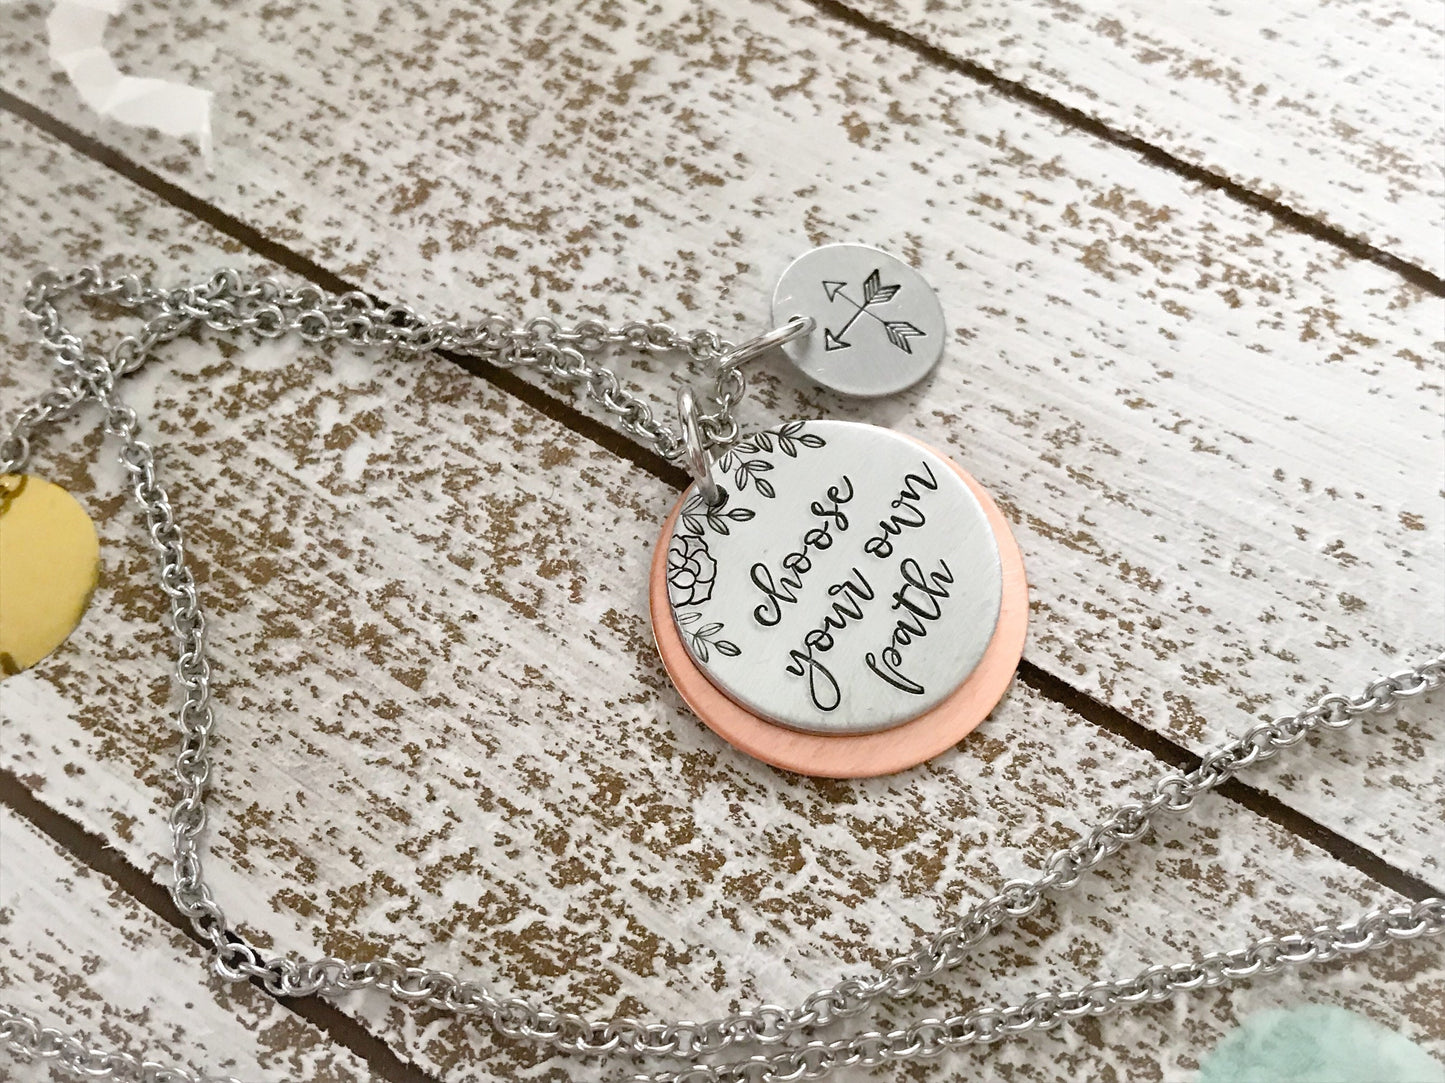 Choose your own path necklace--strong woman--inspirational gift--friend gift--christmas gift--gift under 20--mixed metal